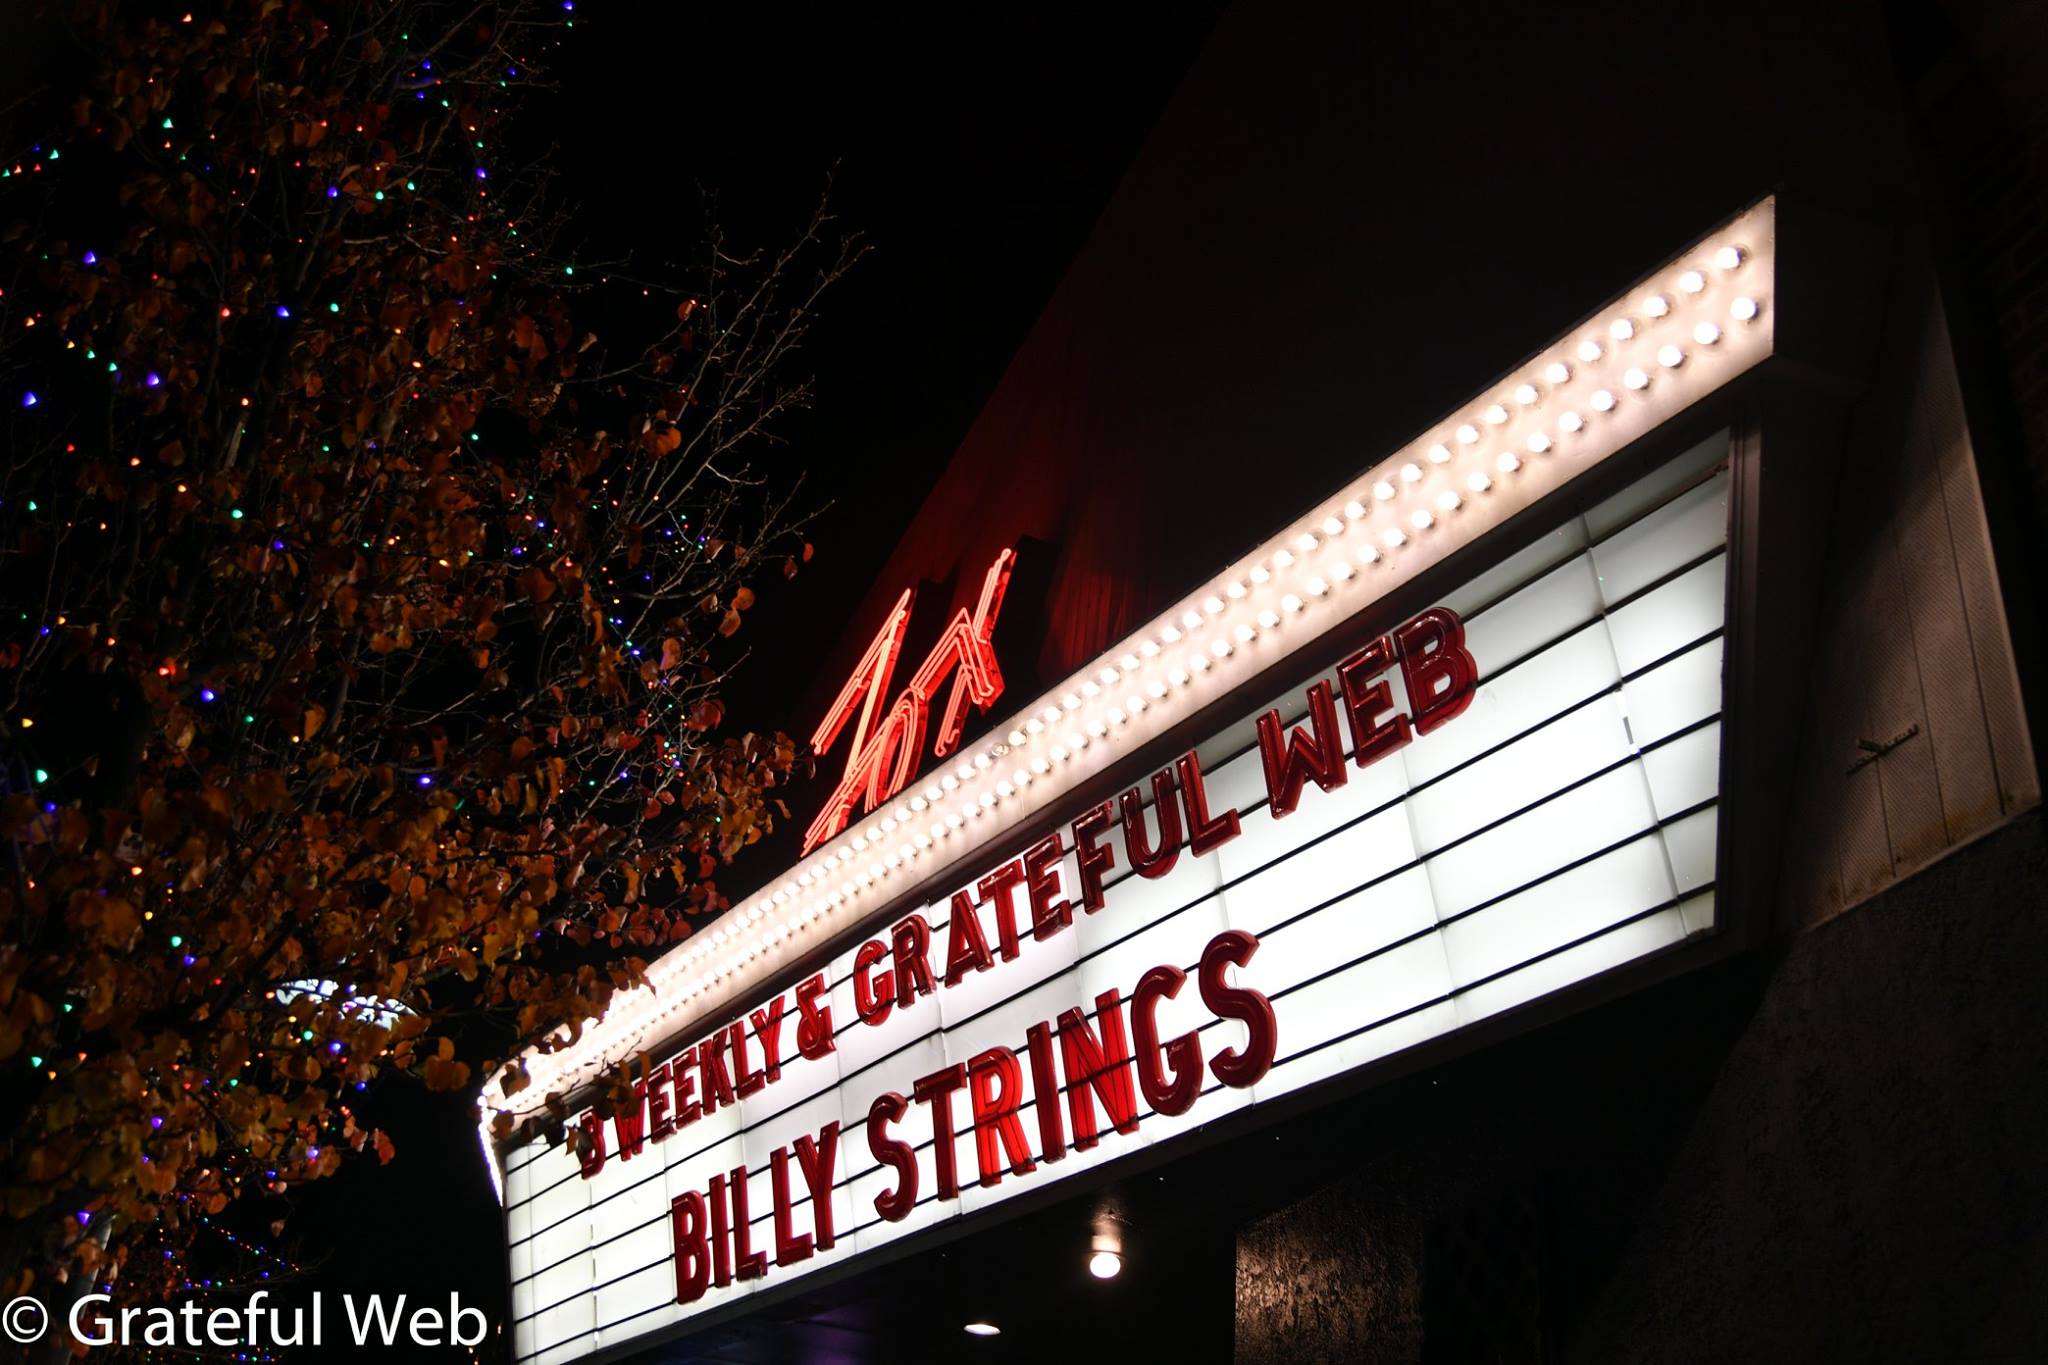 Billy Strings will play the Fox Theatre again this fall (show is already sold out!)